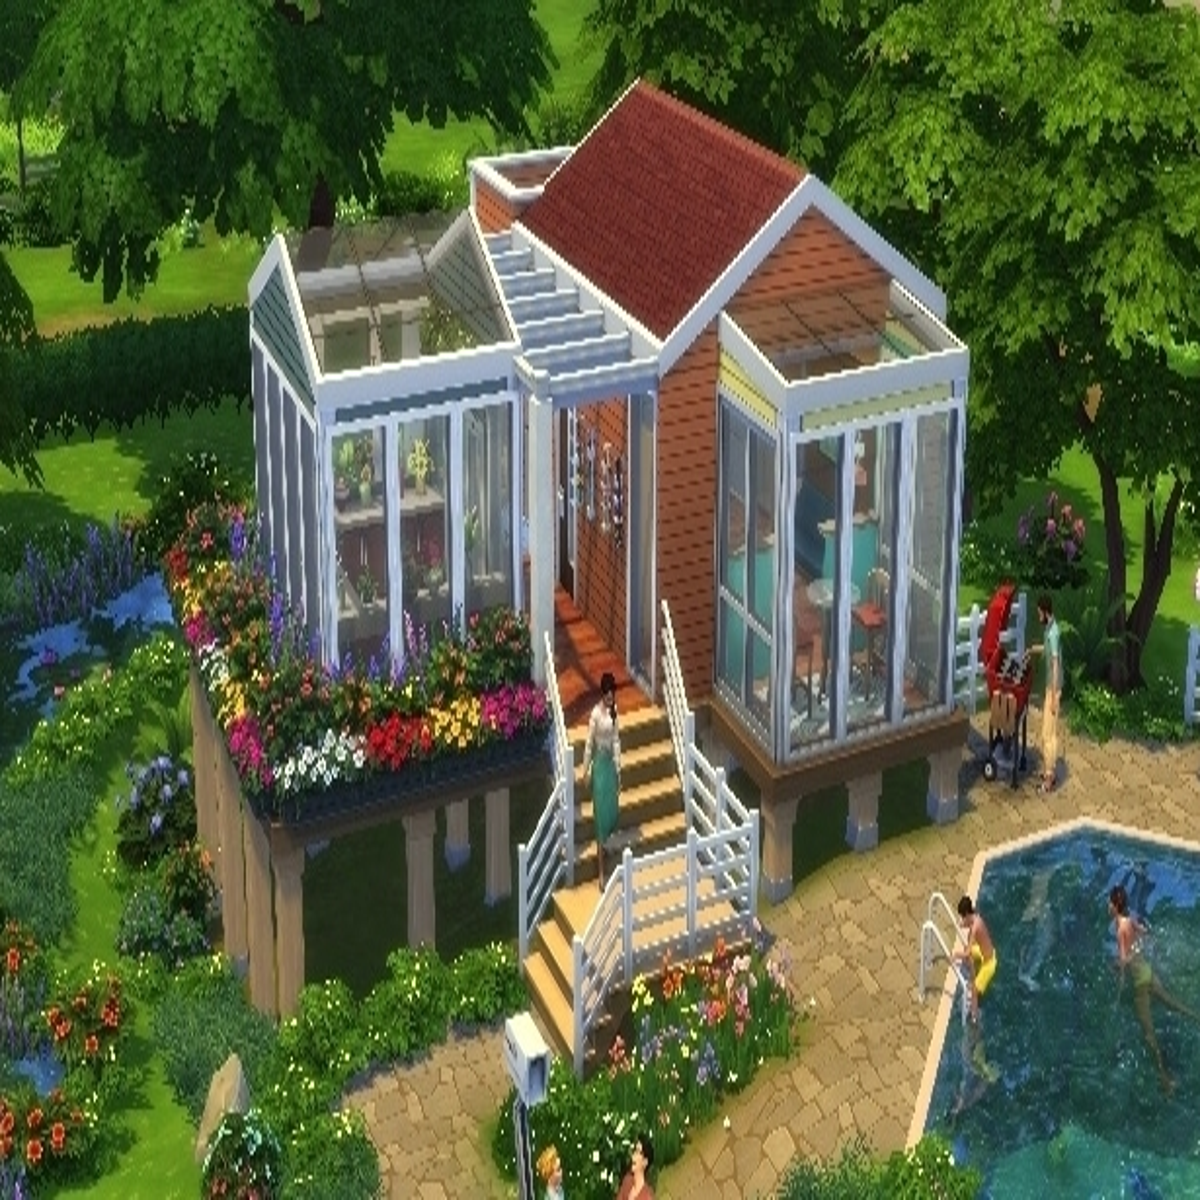 https://assetsio.reedpopcdn.com/the-sims-4-tiny-living-guide-7007-1579879629613.jpg?width=1200&height=1200&fit=crop&quality=100&format=png&enable=upscale&auto=webp